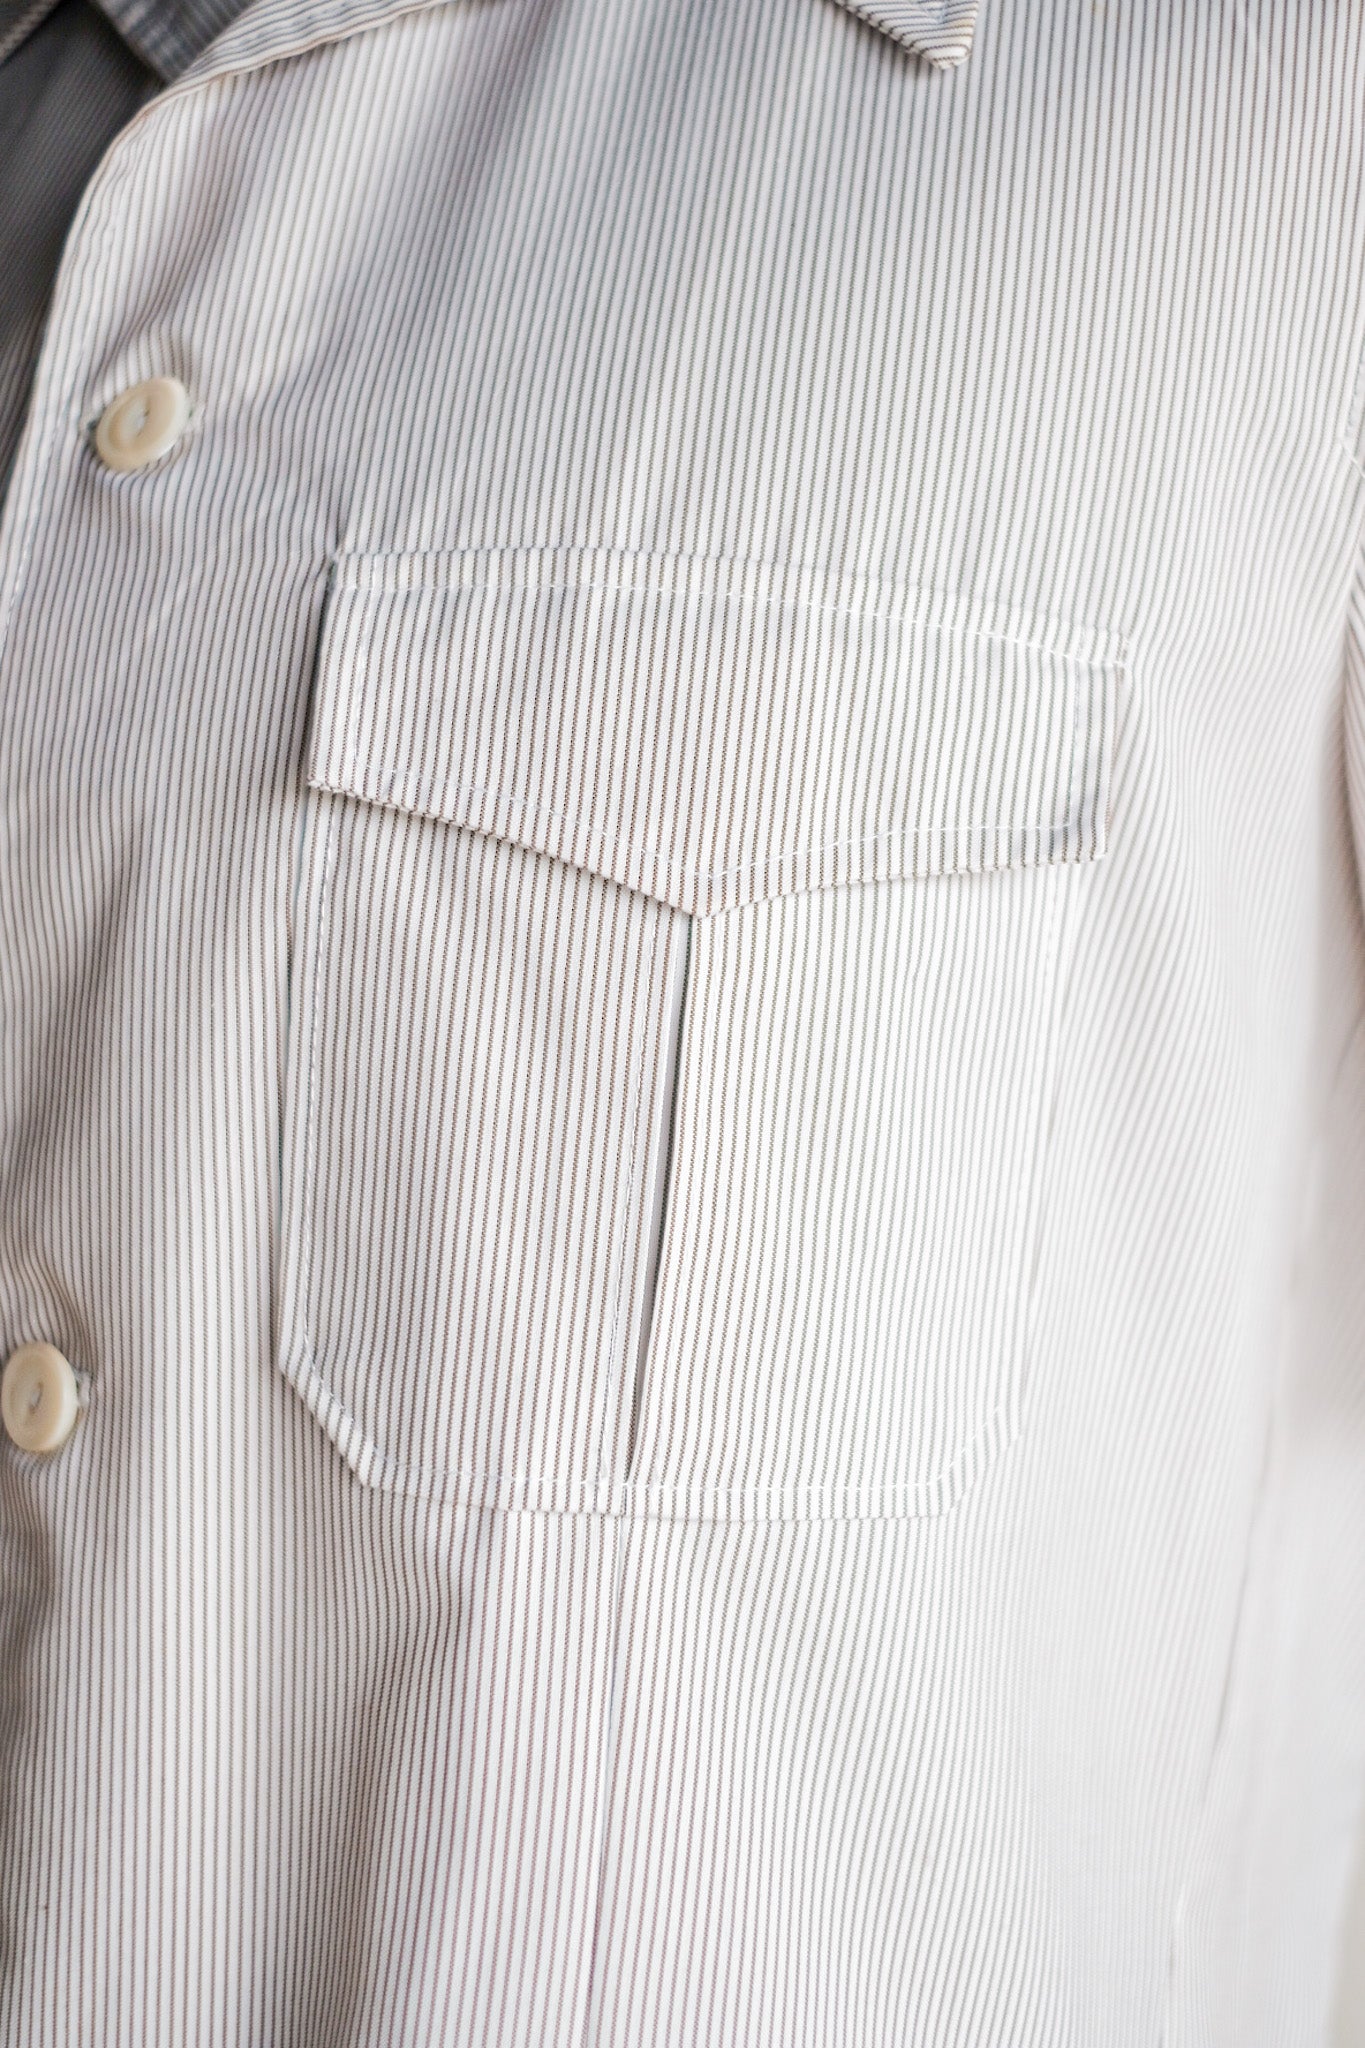 【~60's】French Vintage S/S Cotton Shirt